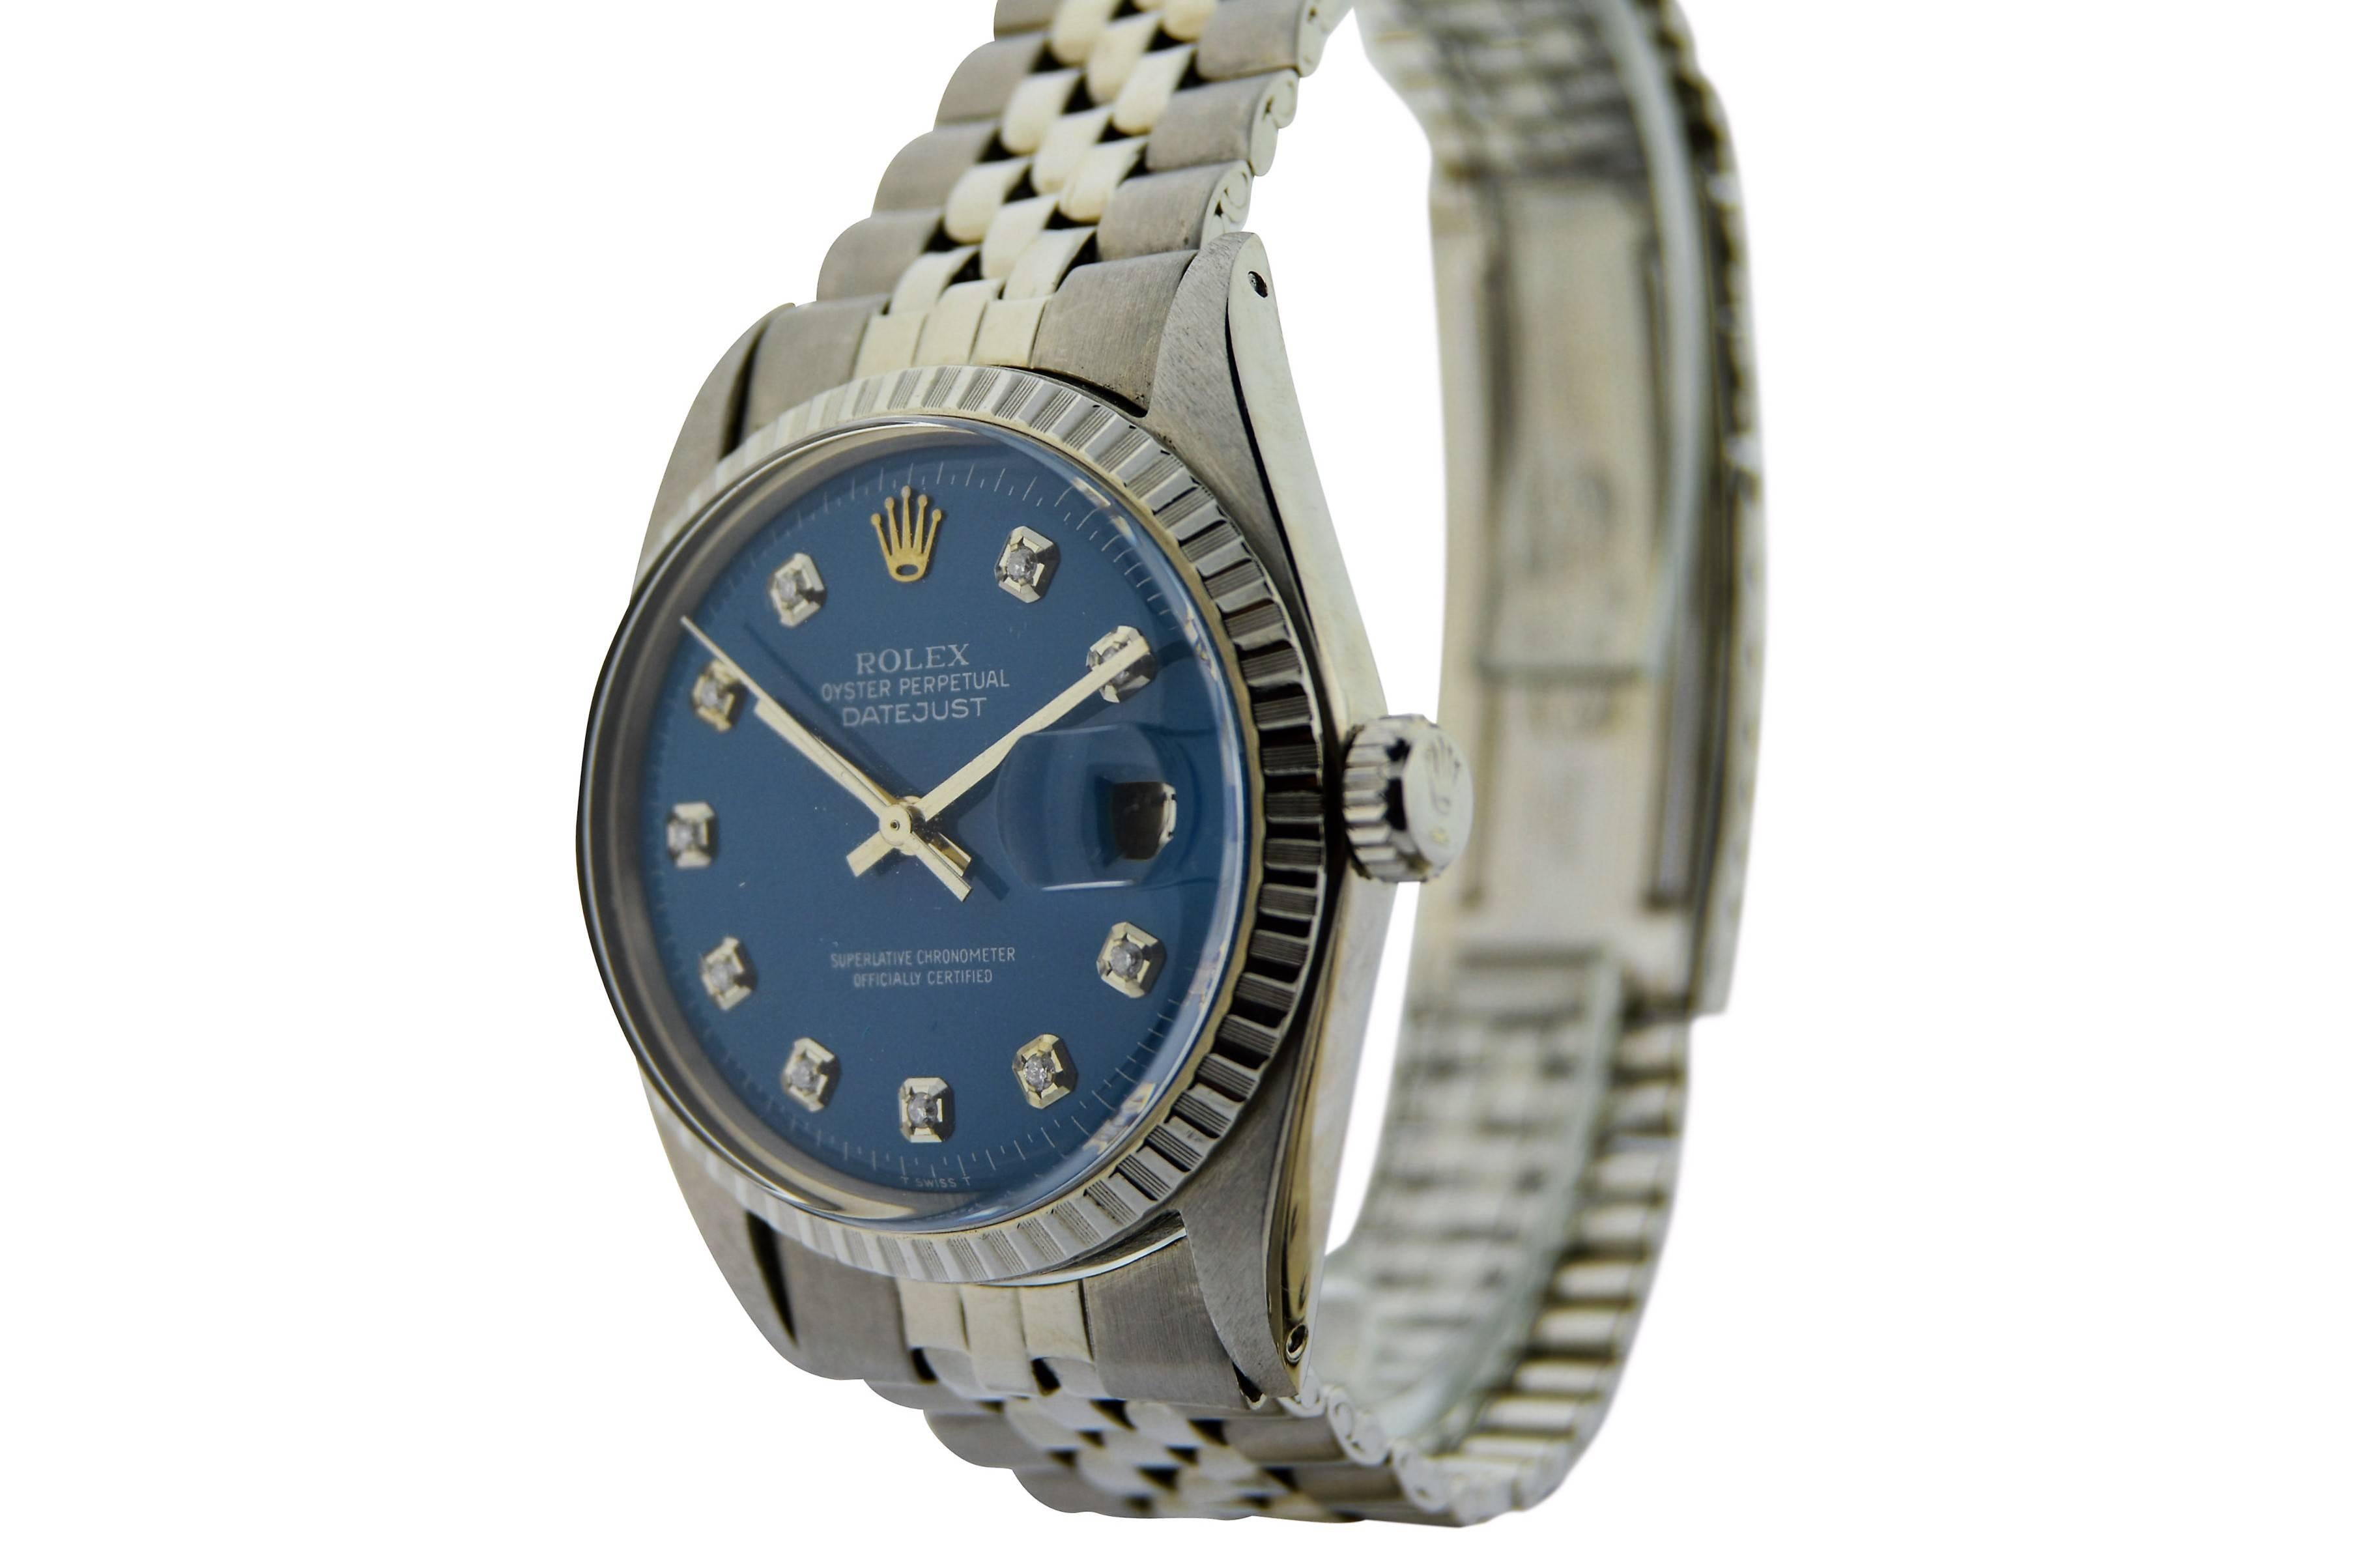 FACTORY / HOUSE: Rolex 
STYLE / REFERENCE: Datejust / 1601 
METAL / MATERIAL: Stainless Steel 
DIMENSIONS:  44mm  X  38mm
CIRCA: 1970's
MOVEMENT / CALIBER: 26 Jewels / 1570
DIAL / HANDS: Blue Diamond Replacement Dial / Baton Hands
ATTACHMENT /